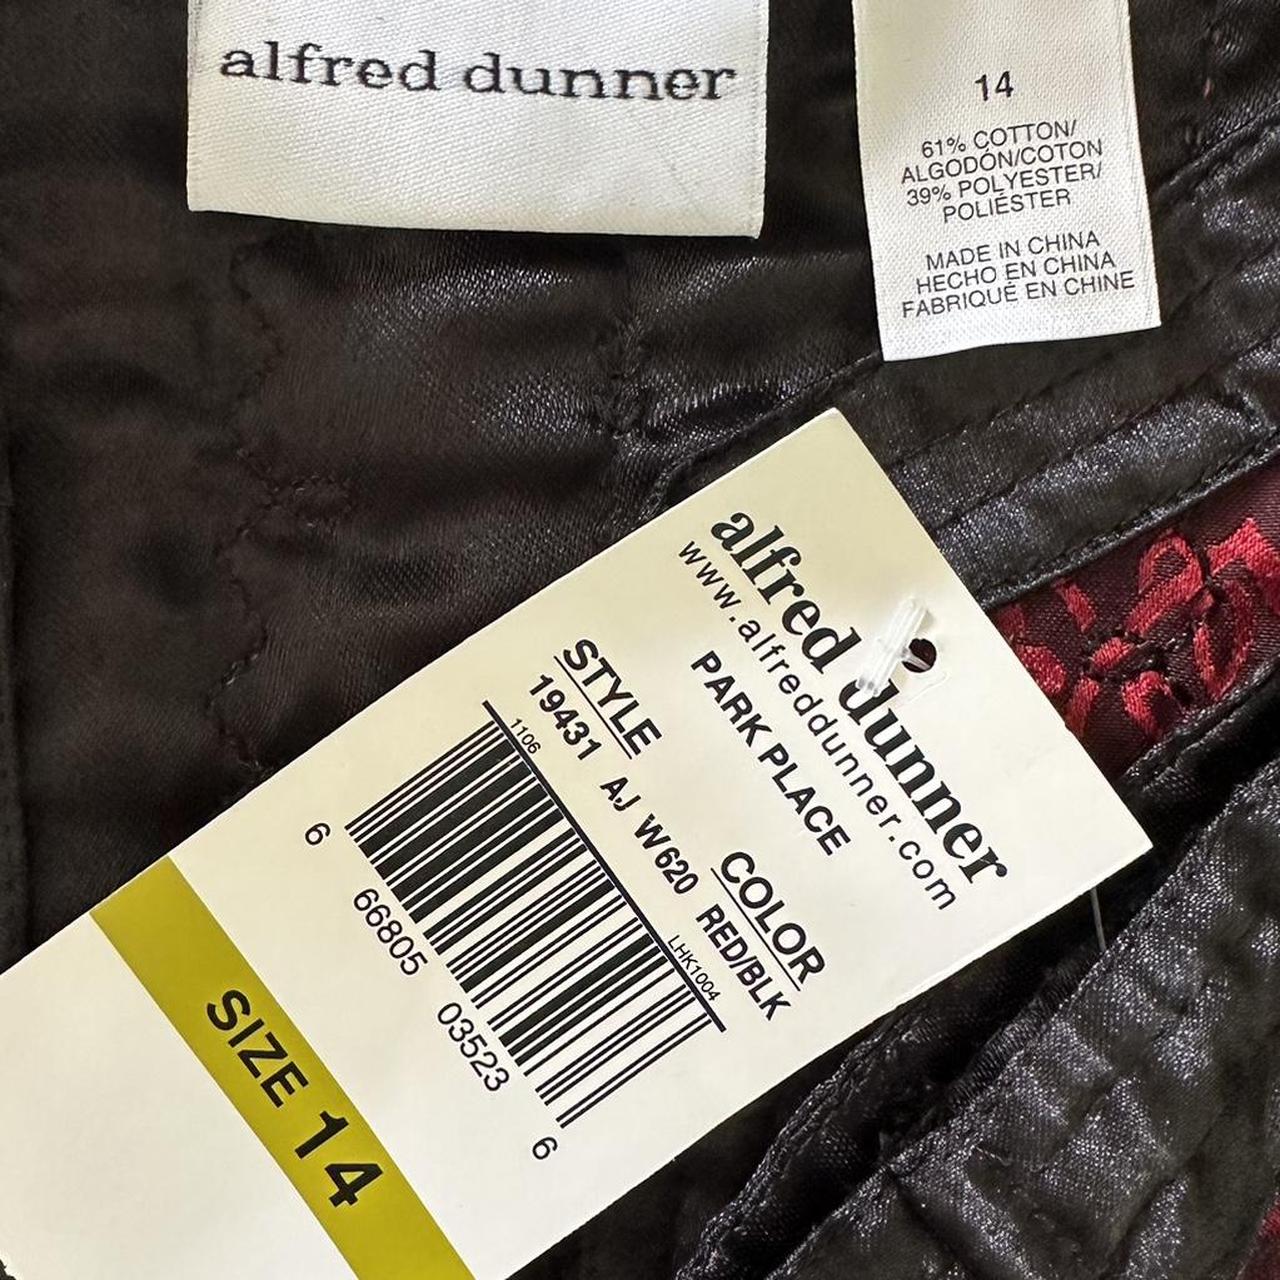 Alfred Dunner Women's Red and Black Jacket